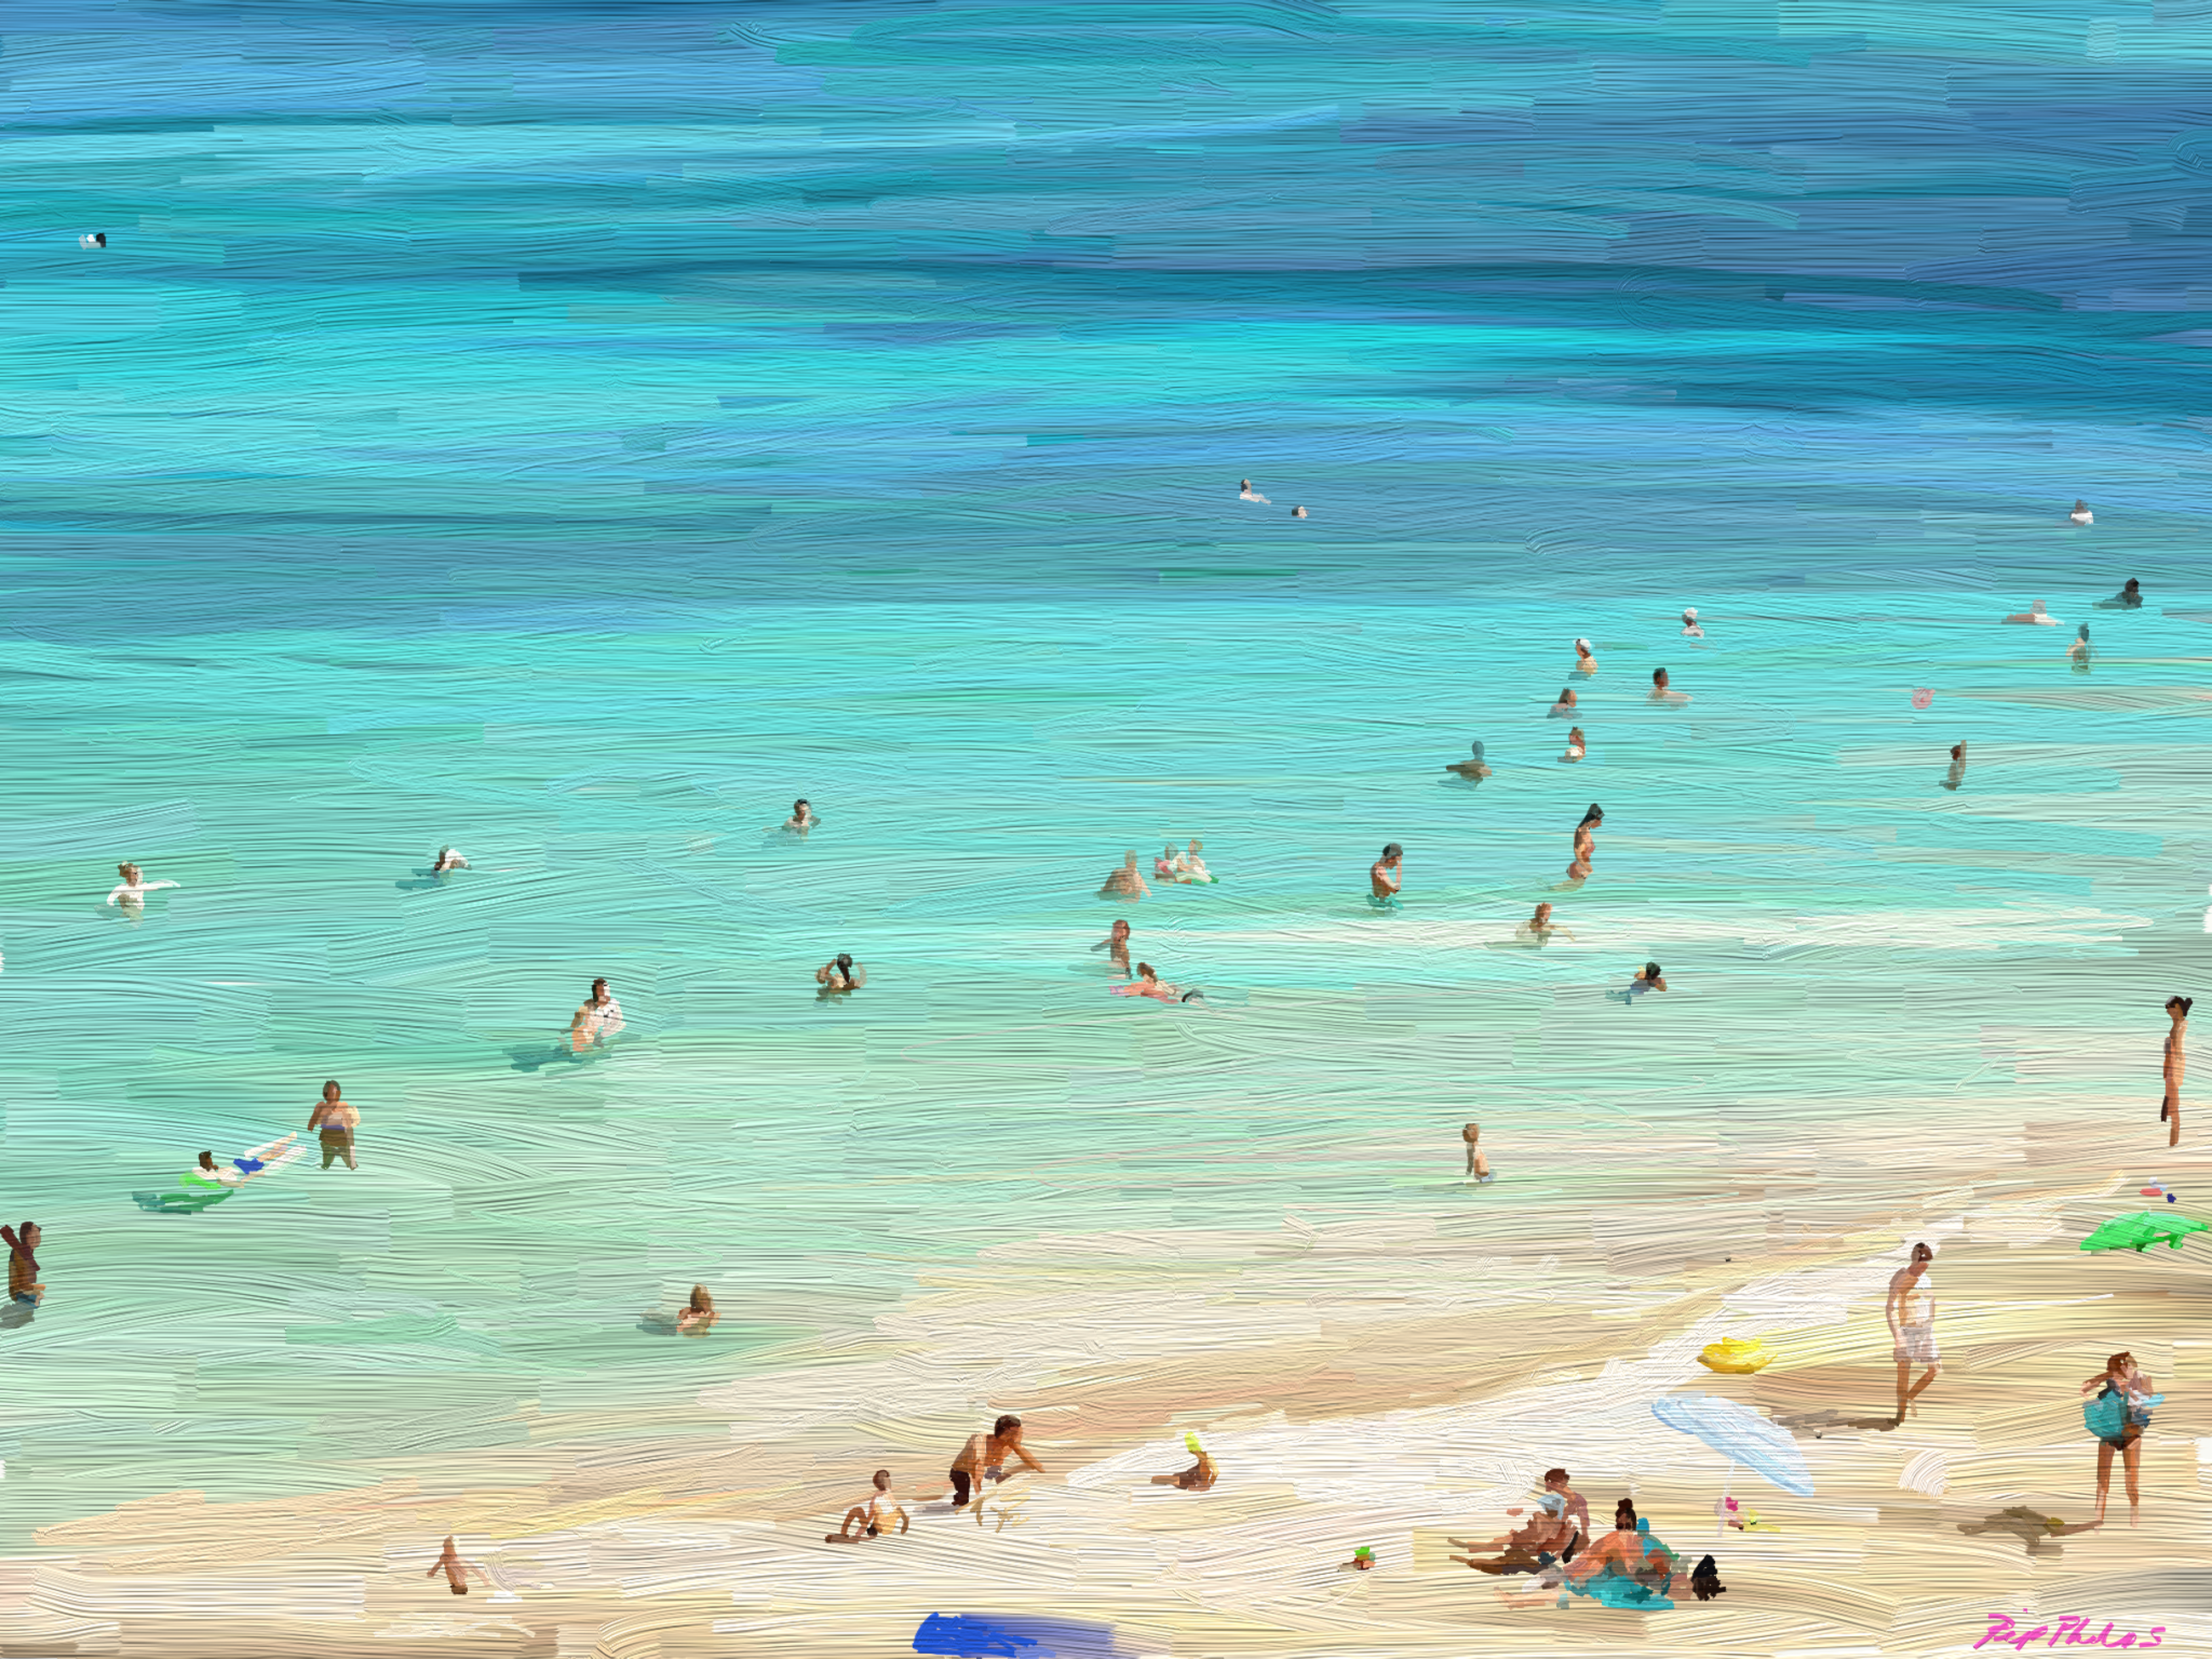 Beach Day Ed. 1 of 25 limited edition reproduction print by Pip Phelps on Bluethumb.